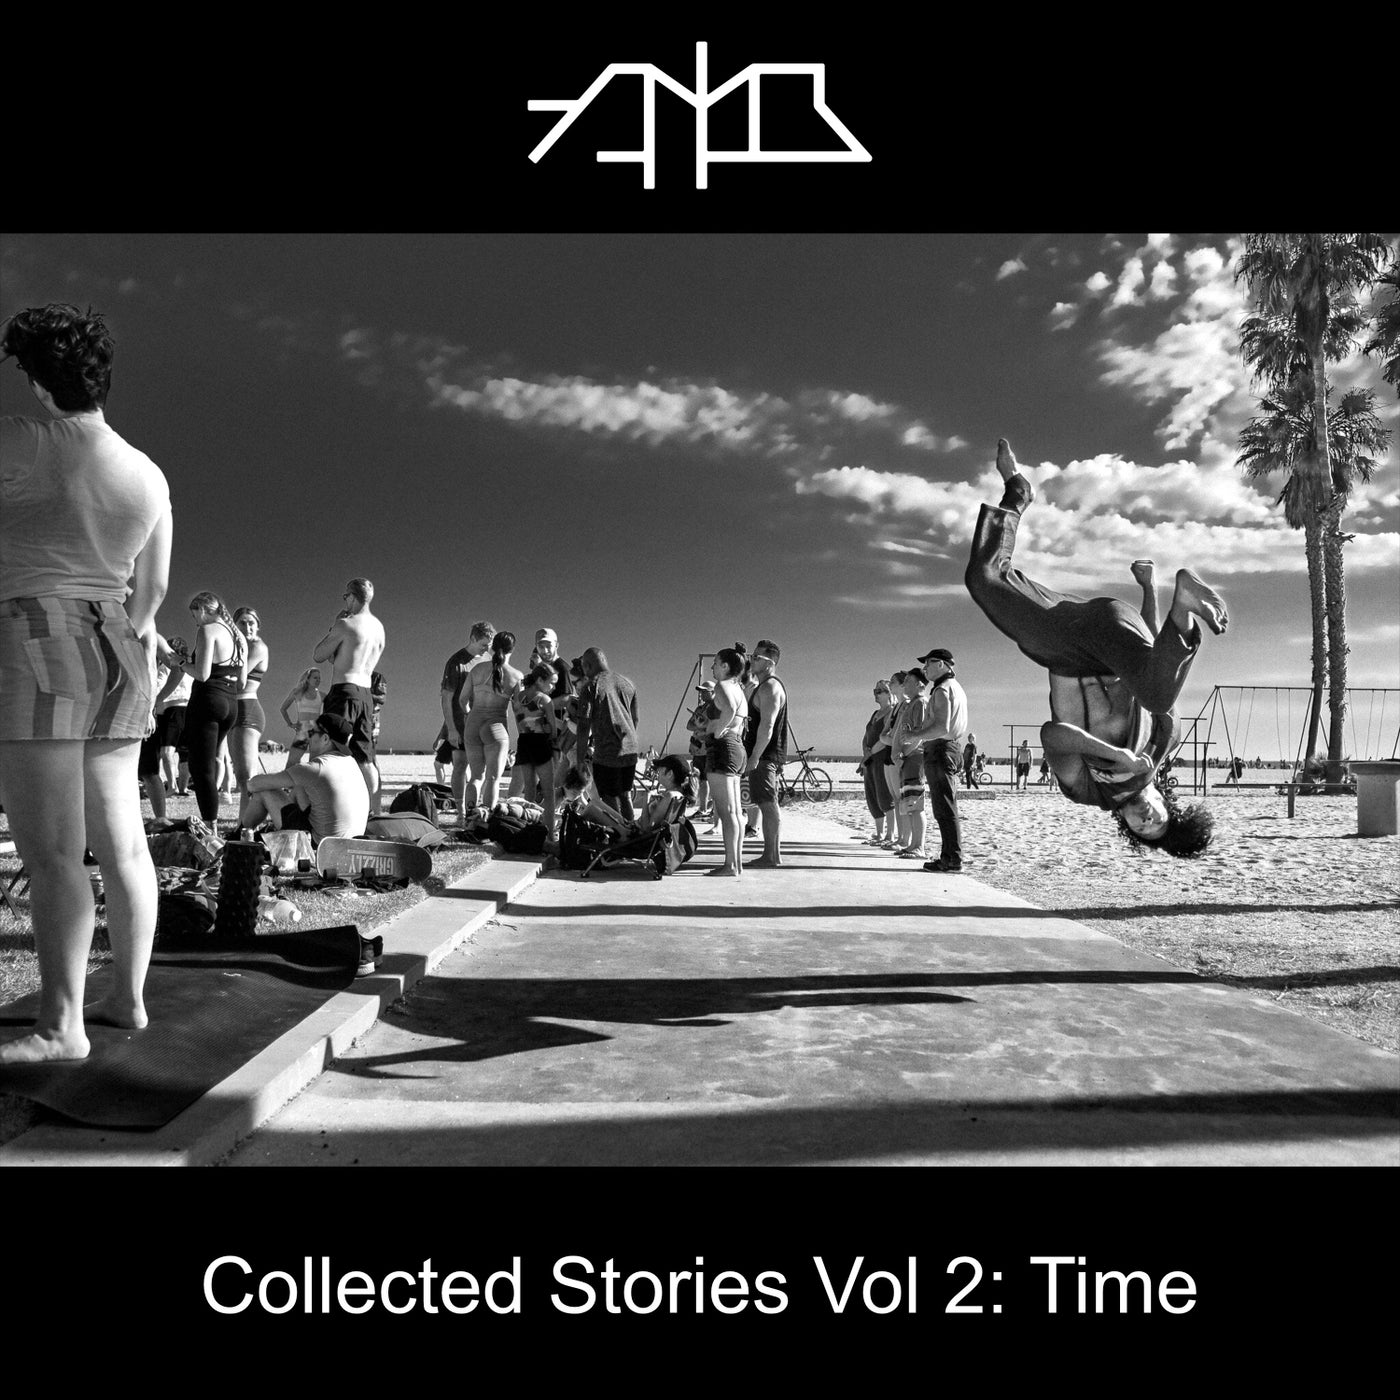 Collected Stories Vol 2: Time